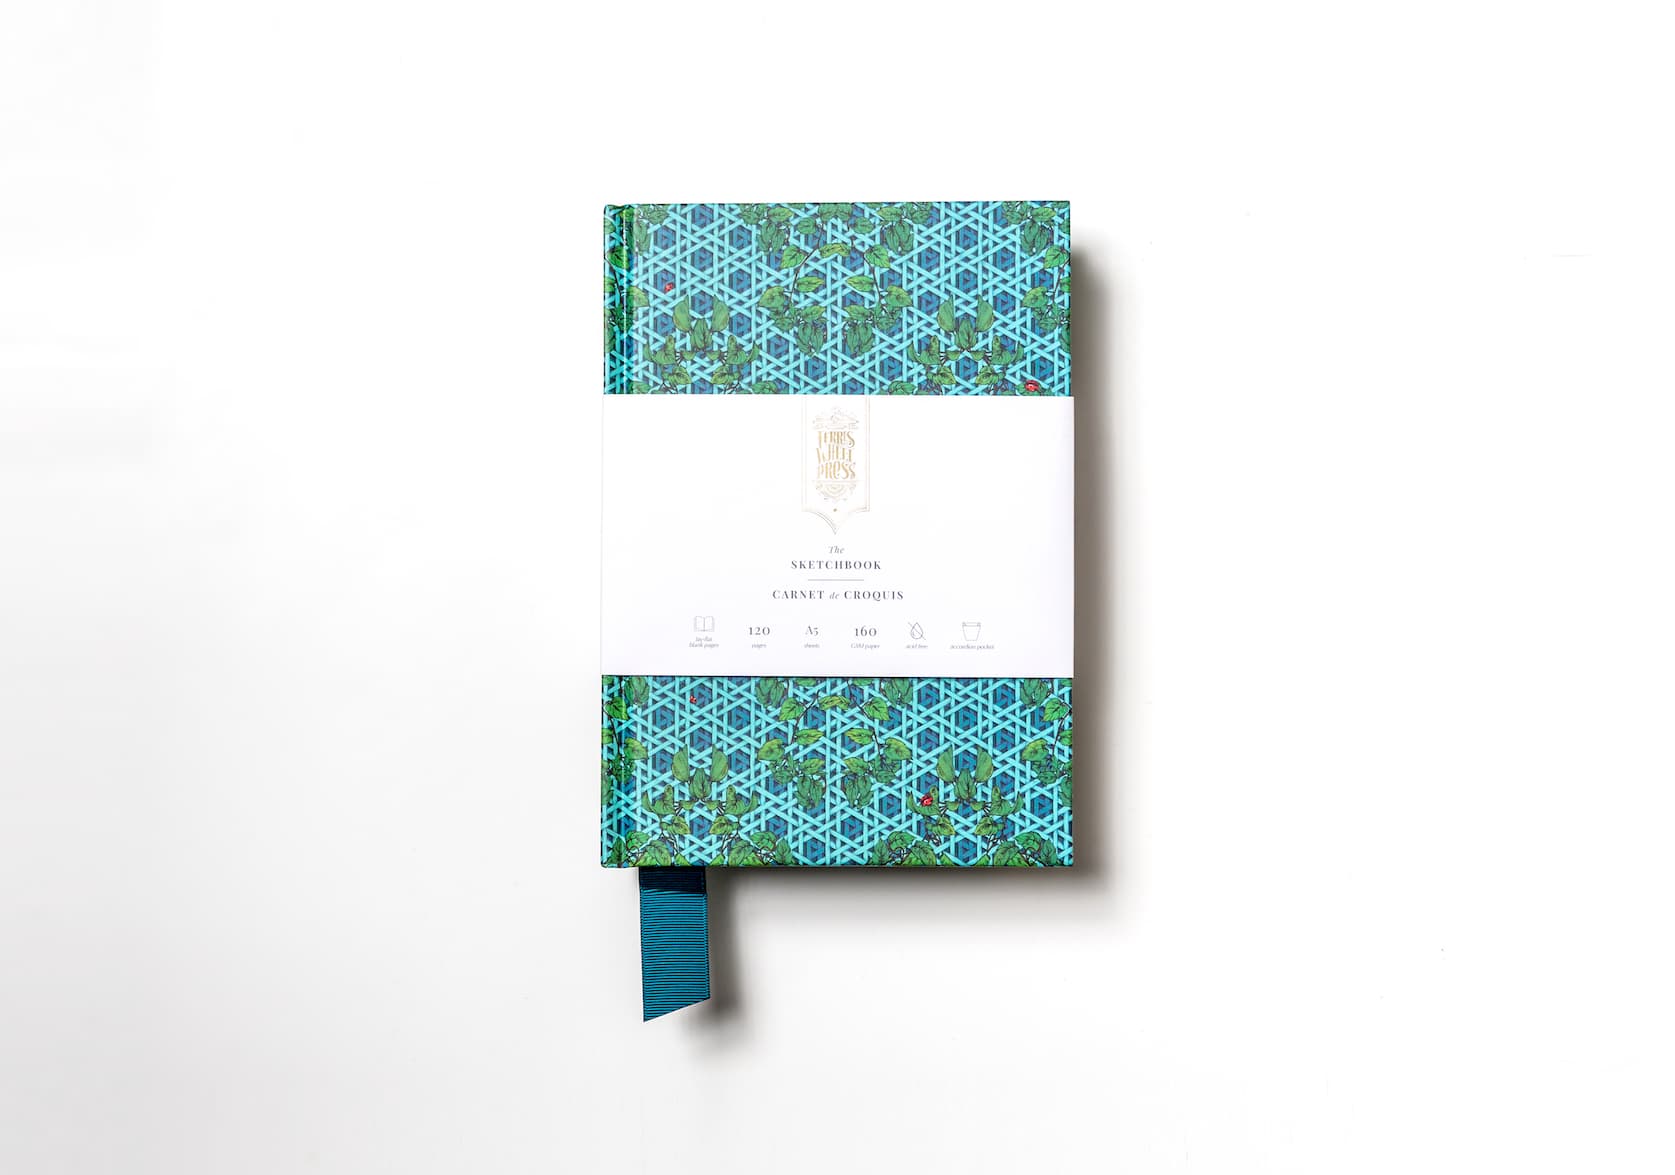 A teal sketchbook covered in paper with a hand-illustrated rattan pattern featuring a teal fabric ribbon sticking out of the bottom. Gold text on the notebook's packaging reads: Ferris Wheel Press logo. The Sketchbook. Carnet de Croquis.